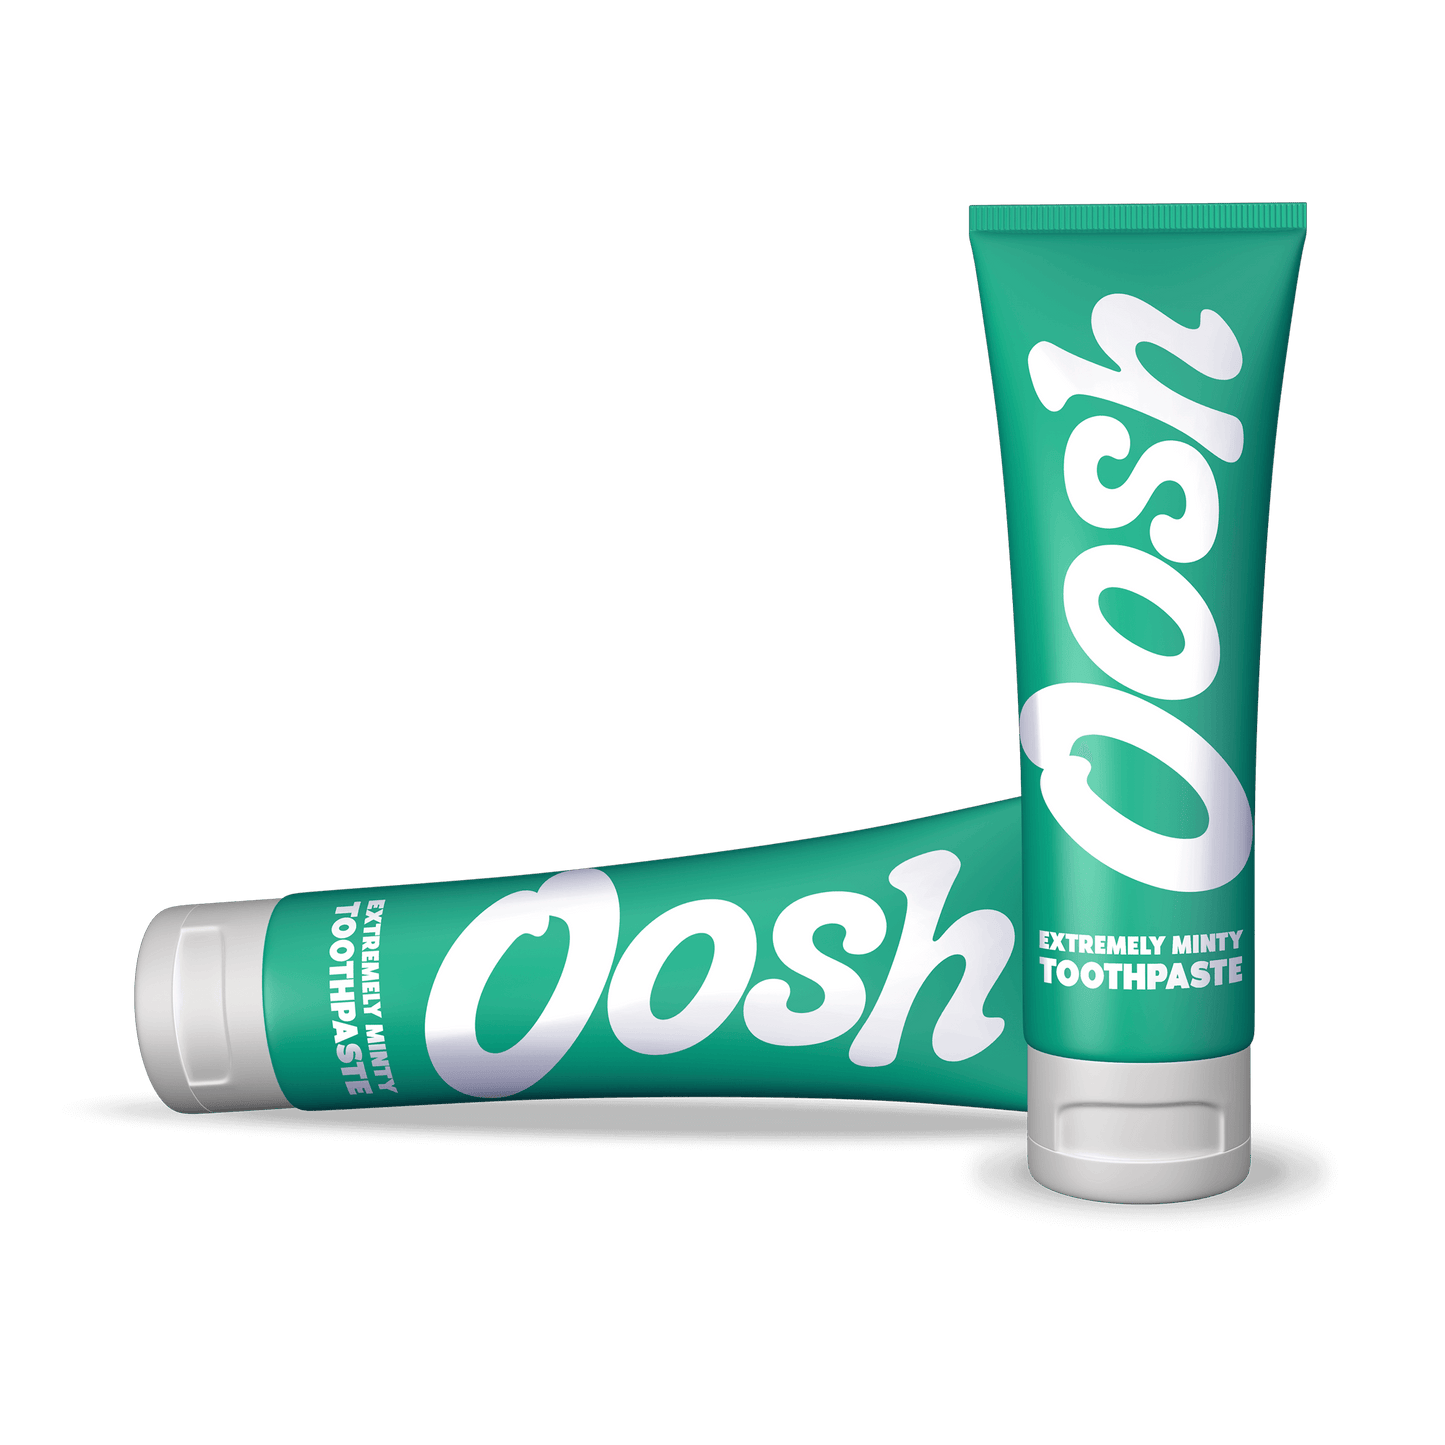 Oosh toothpaste is available in packs of 2